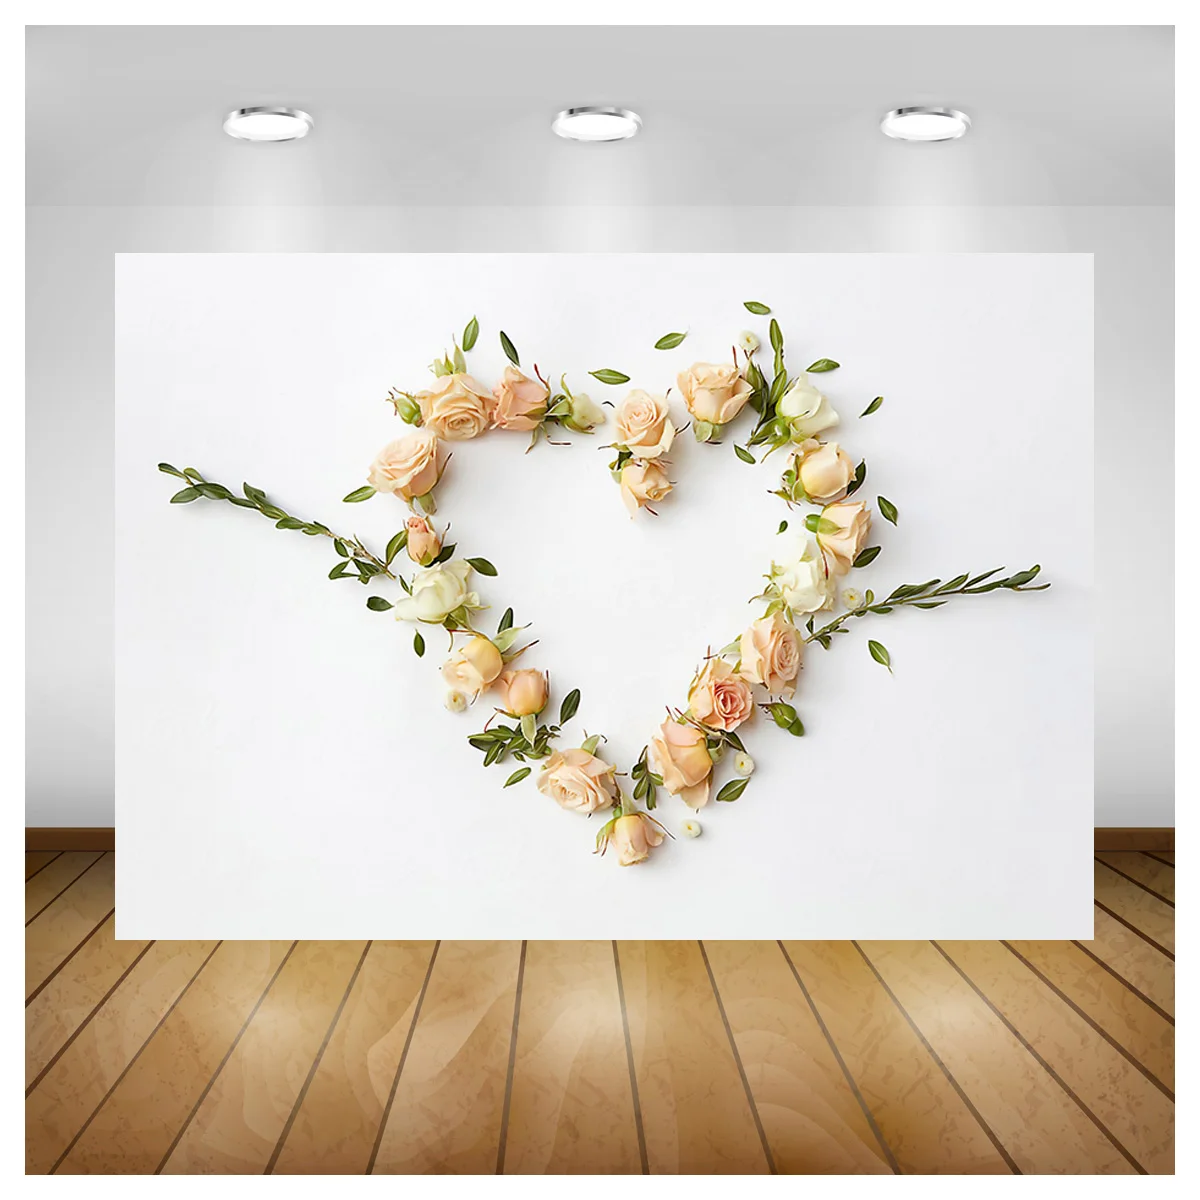 

Valentines Day Photography Backgrounds Wedding Photo Rose Flower Wall Love Portrait Backdrop Photo Studio 22815 QR-03